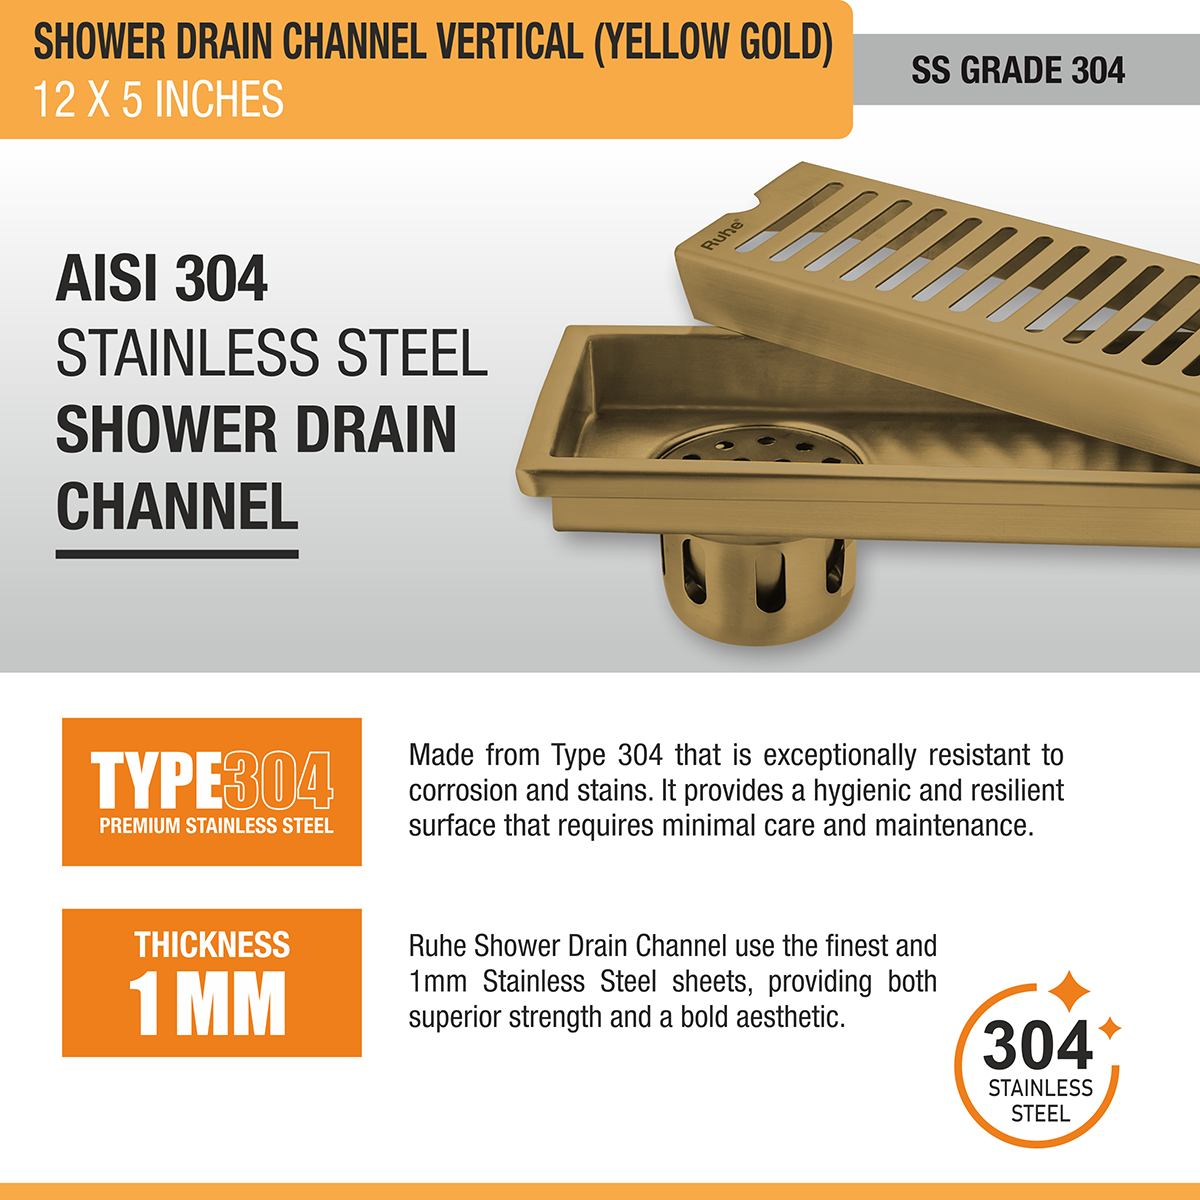 Vertical Shower Drain Channel (12 x 5 Inches) YELLOW GOLD stainless steel